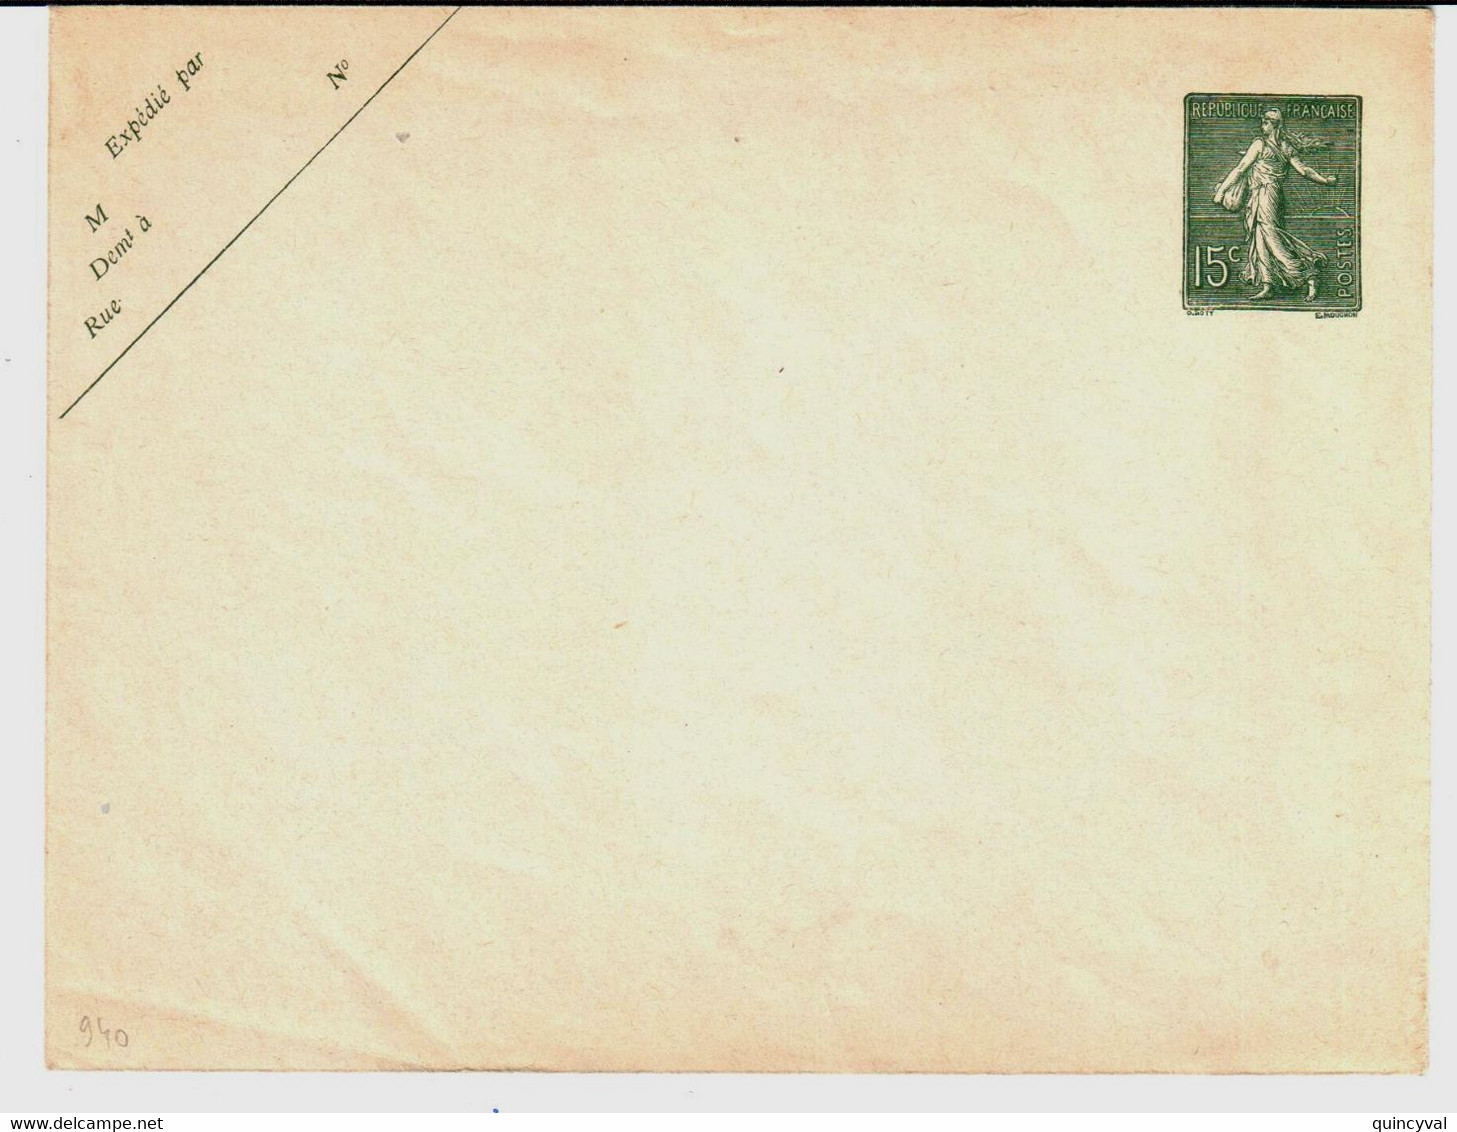 Enveloppe Entier Postal 15c Semeuse Lignée Vert Date 940 Yv 130-E9 Storch B19a Format 147x112 - Standard Covers & Stamped On Demand (before 1995)